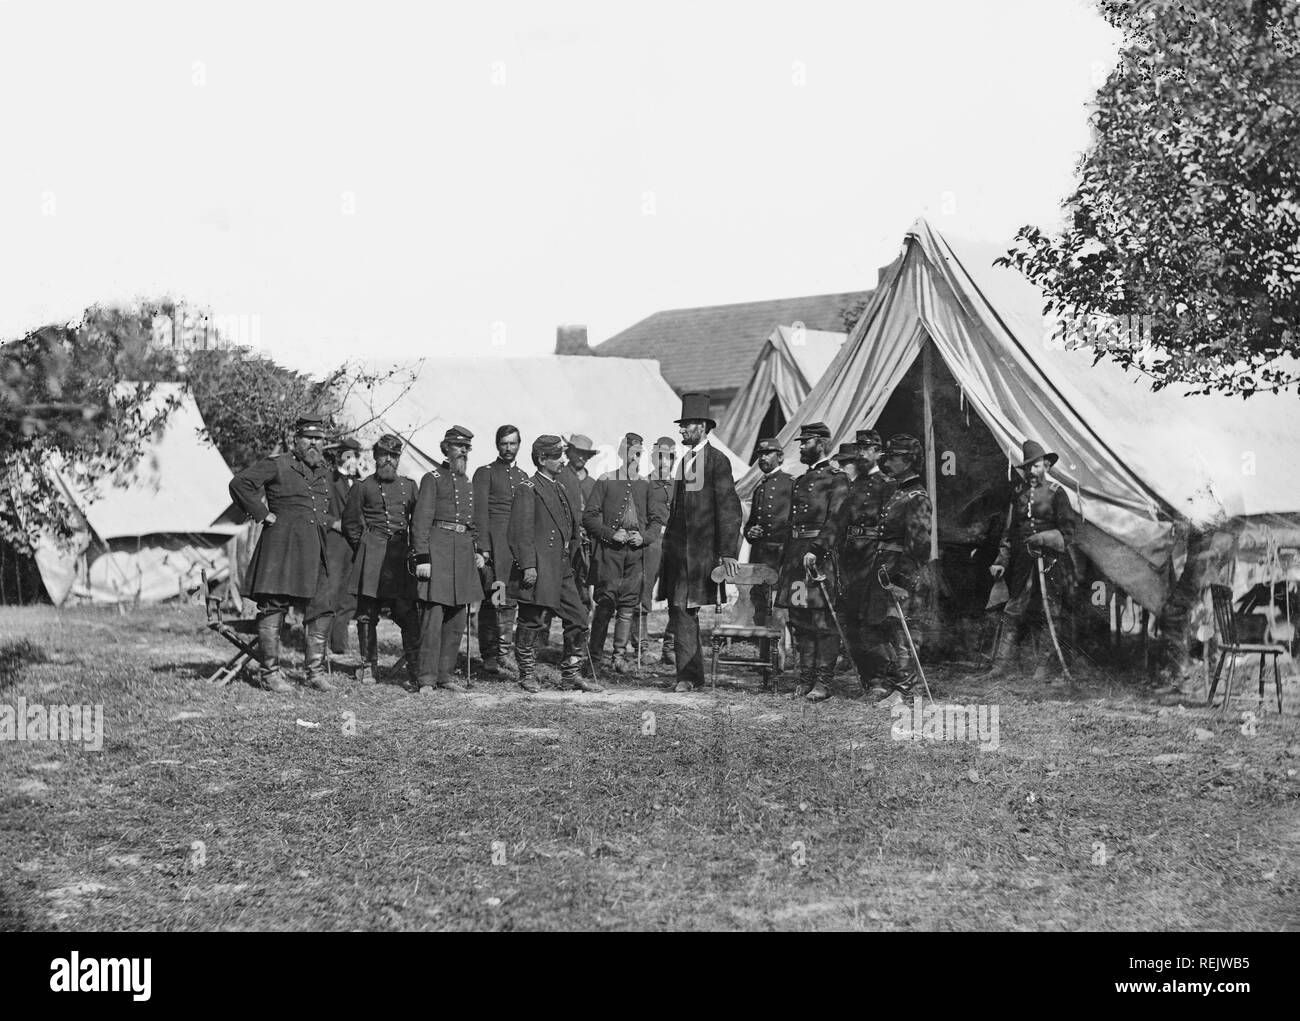 U.S. President Abraham Lincoln with General George B. McClellan and Group of Officers after Battle of Antietam, Alexander Gardner, October 3, 1862 Stock Photo